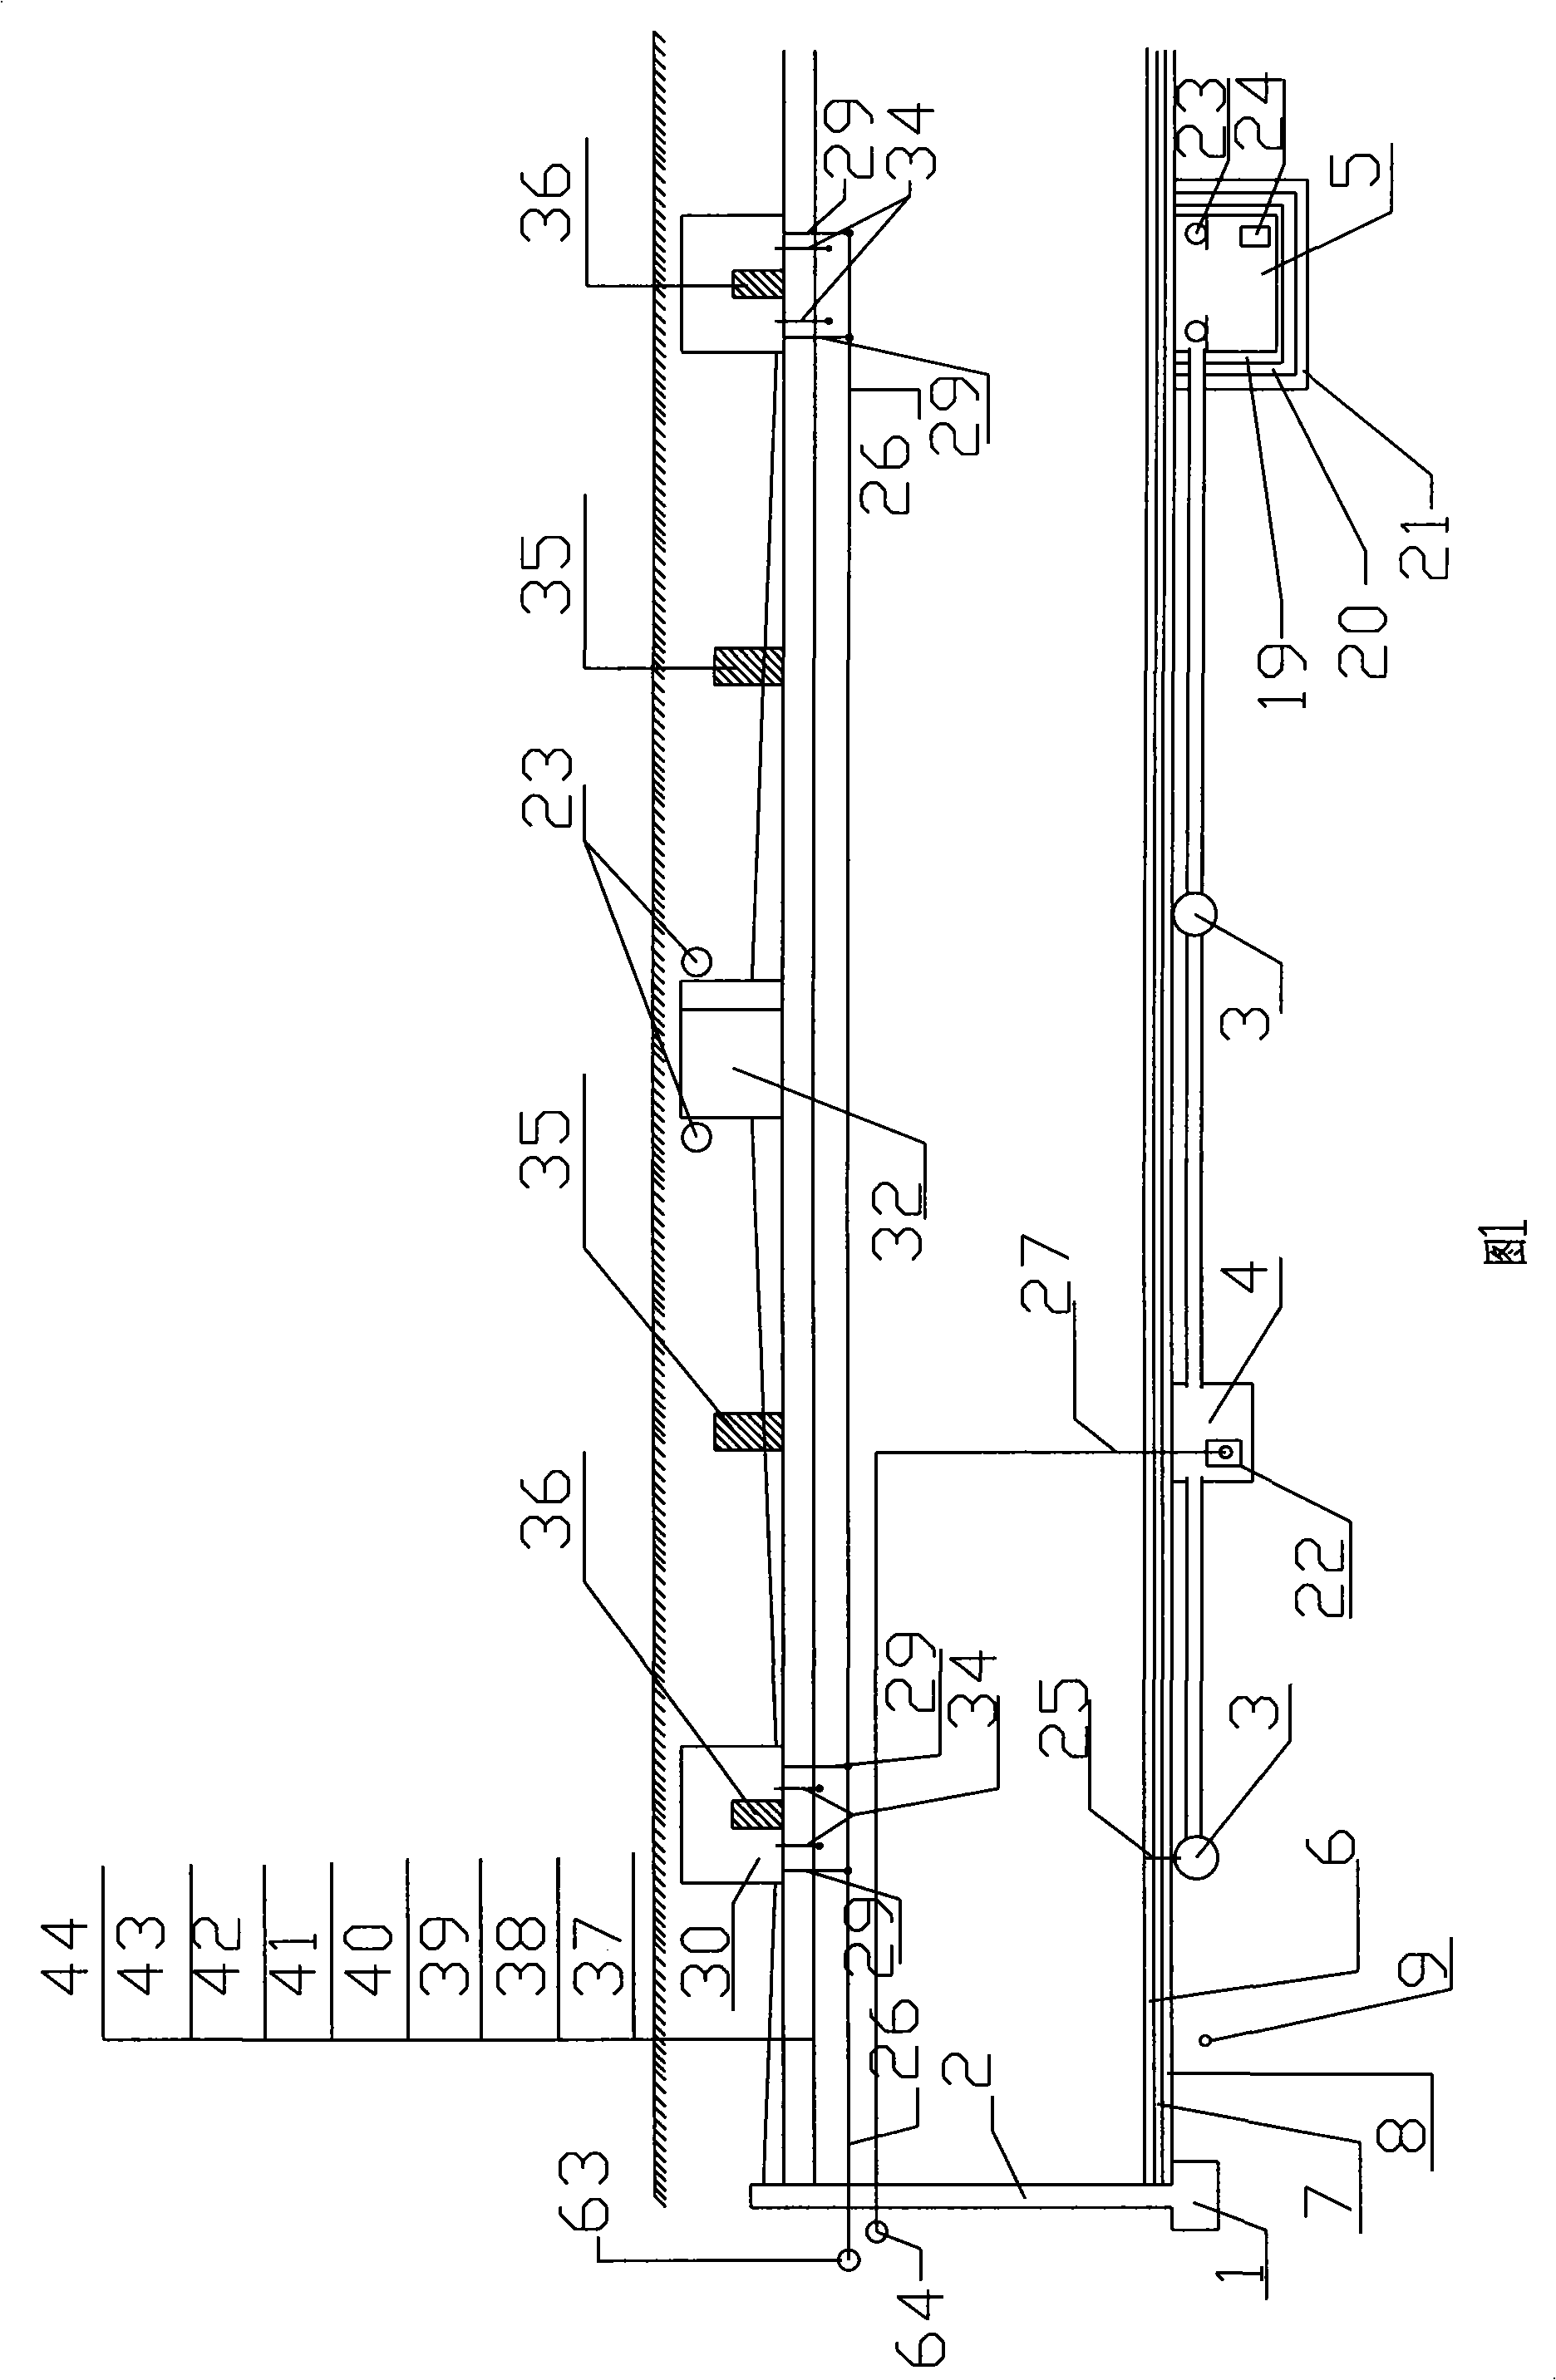 Method and system for basement engineering water proof and water drain